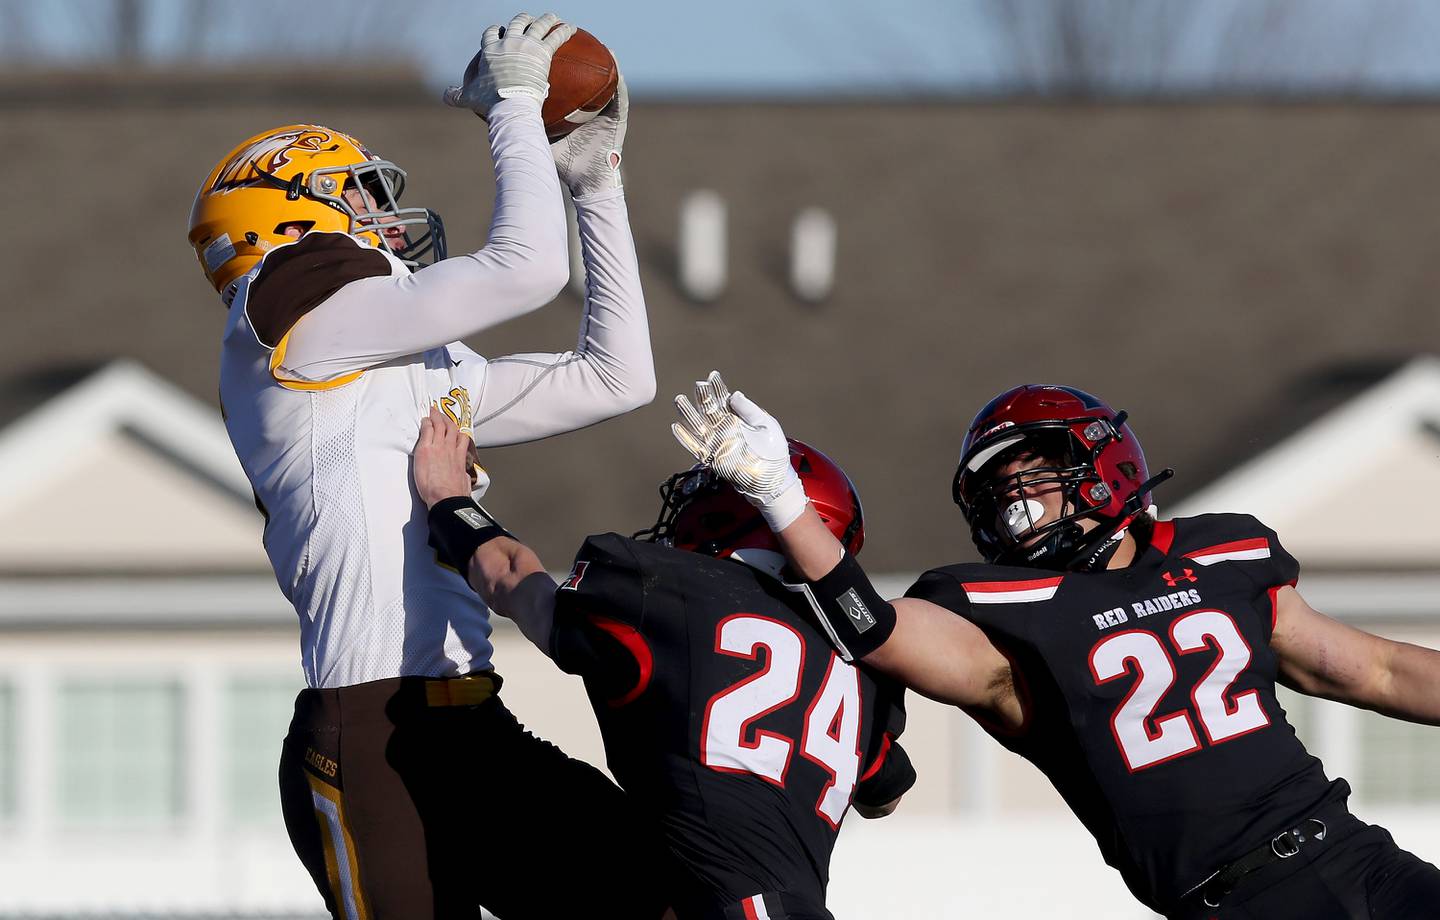 Jacobs's Grant Stec, left, hauls in a long pass for a touchdown ahead of Huntley's Nicholas Martino, center, and Christopher Medina, right, during their season opening football game at Huntley High School on Friday, March 19, 2021 in Huntley.